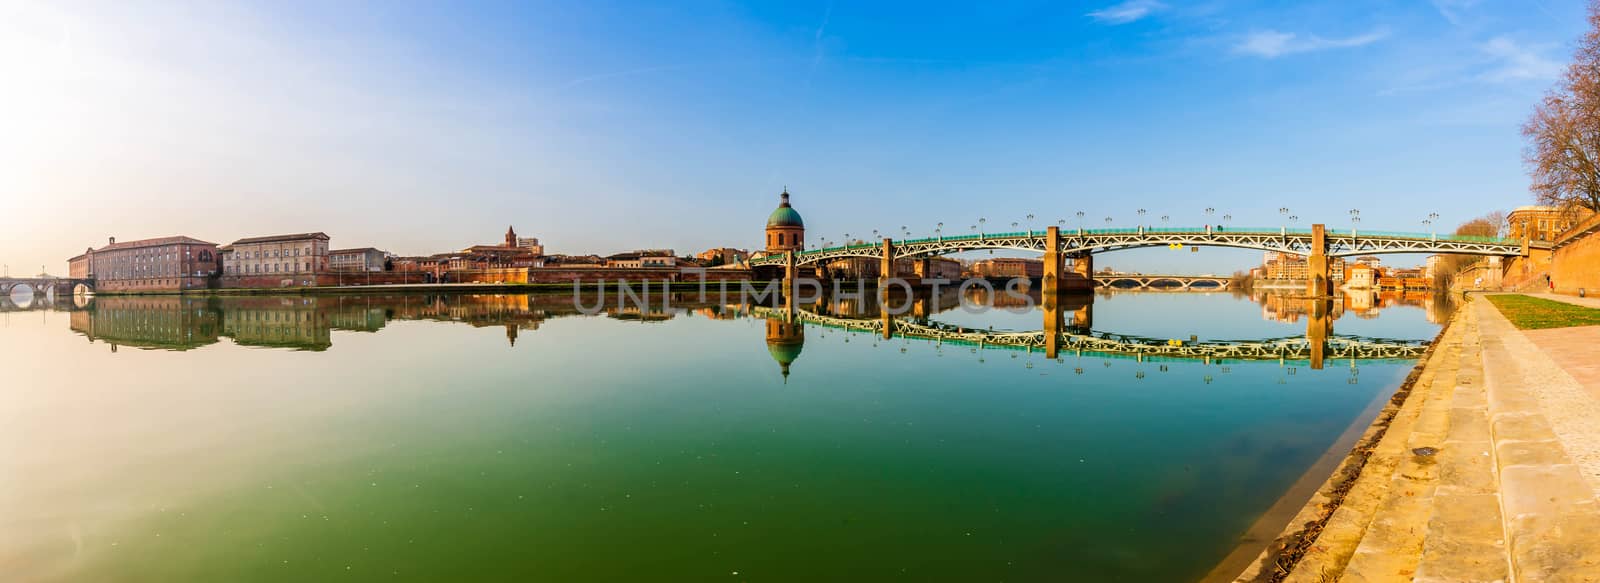 The Pont Saint Pierre and the Pont Neuf over the Garonne and the tomb in Toulouse in Occitanie, France by Frederic